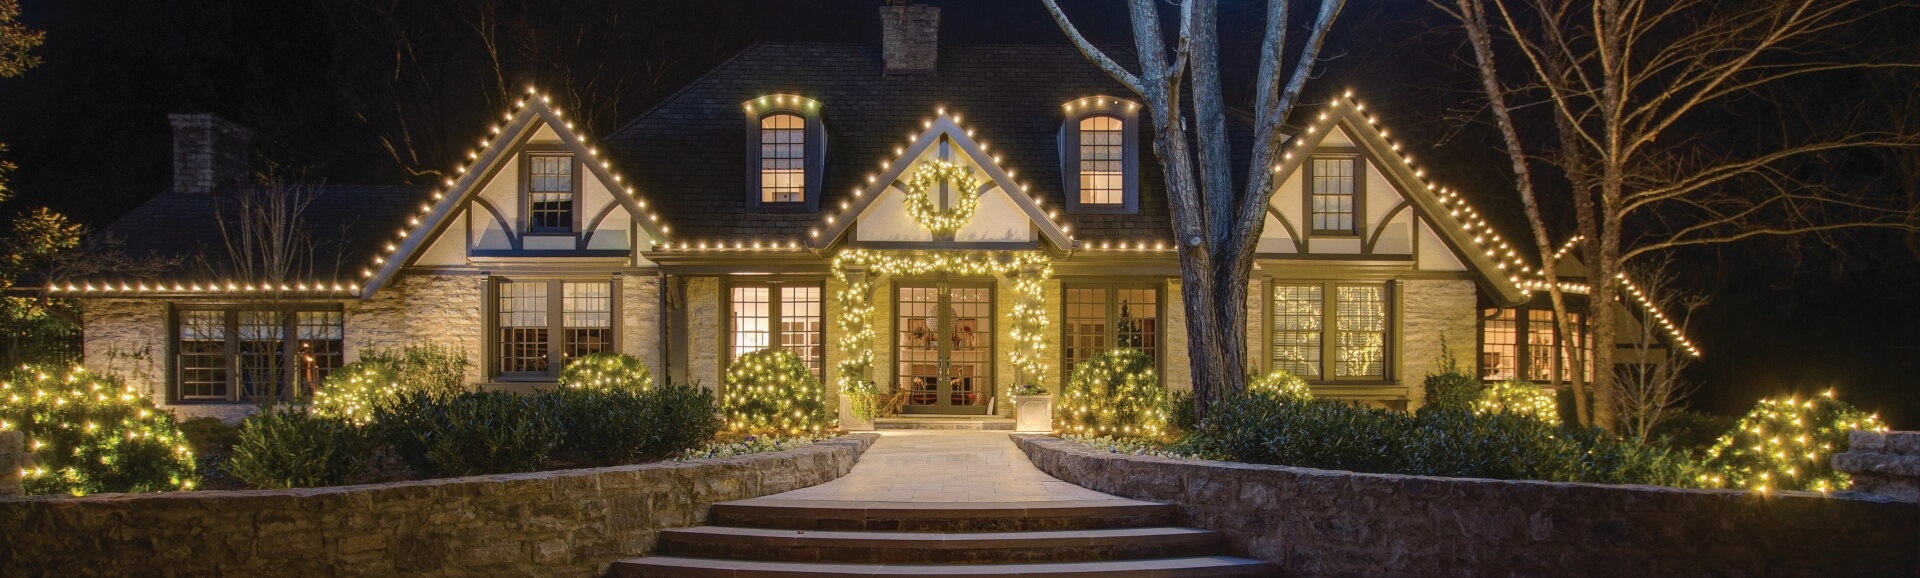 rochester home decorated with holiday lighting